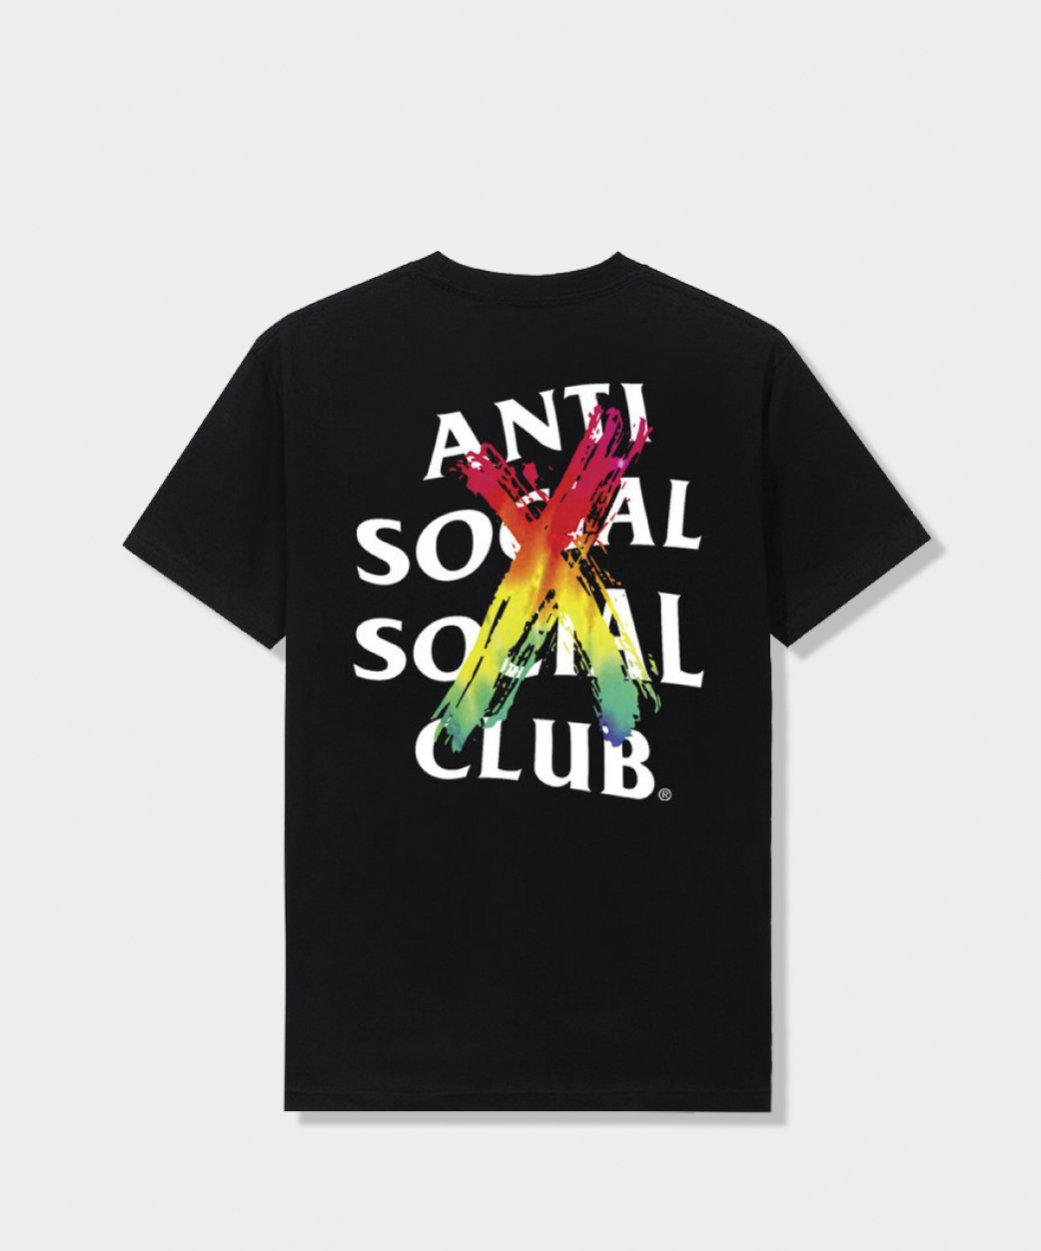 SALE 40% OFF! <br>Anti Social Social Club ASSCアンチソーシャルソーシャルクラブ<br>Cancelled Rainbow Black Tee/Tシャツ<img class='new_mark_img2' src='https://img.shop-pro.jp/img/new/icons20.gif' style='border:none;display:inline;margin:0px;padding:0px;width:auto;' />